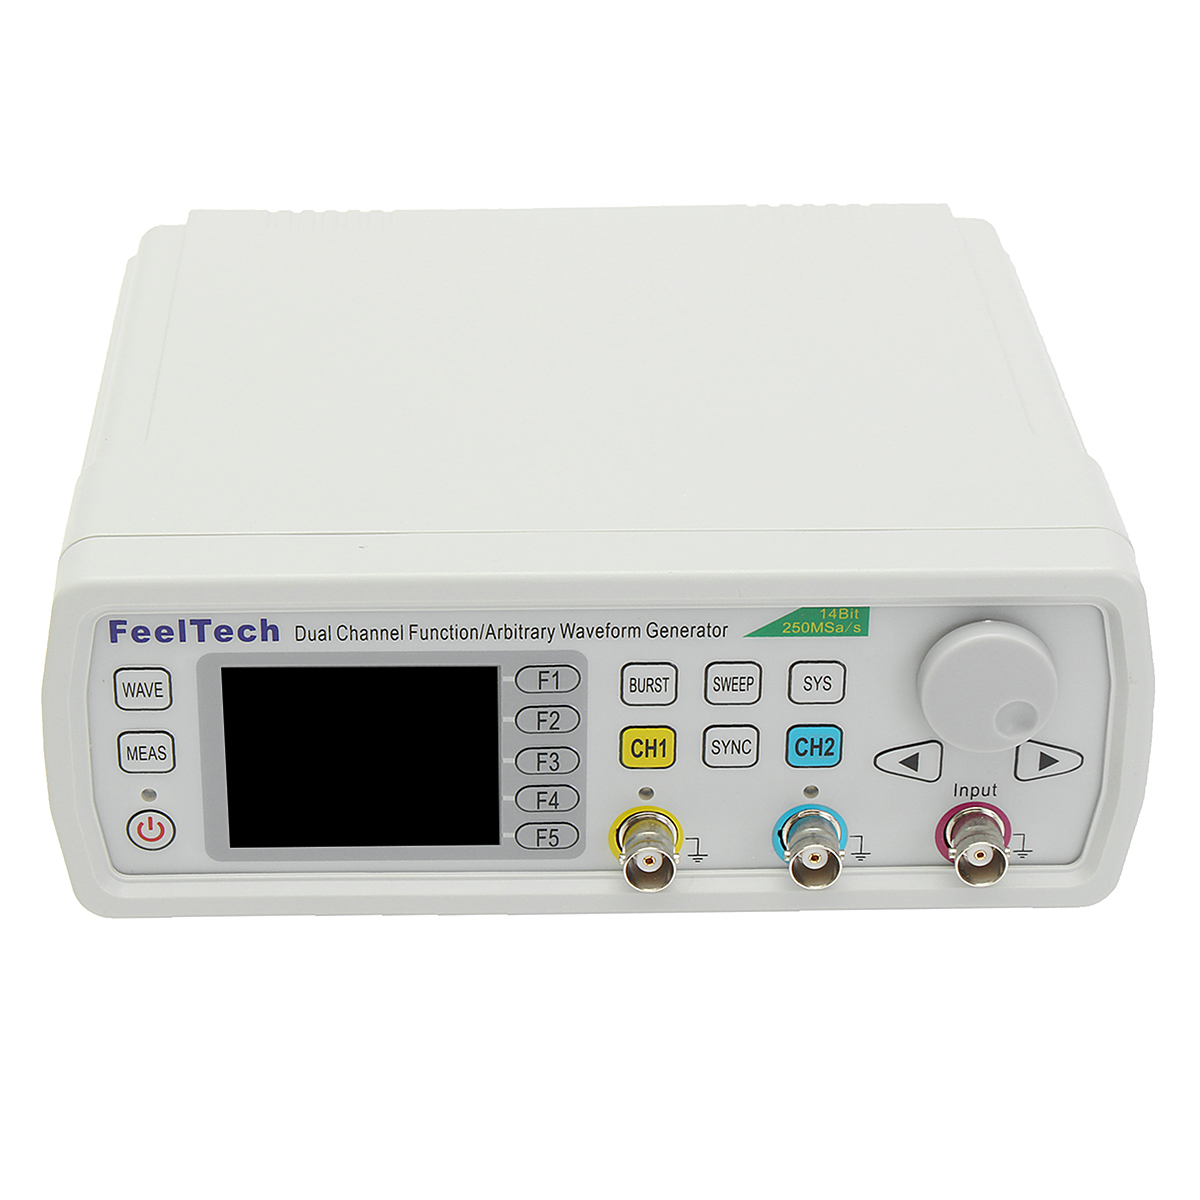 FY6600 Digital 12-60MHz Dual Channel DDS Function Arbitrary Waveform Signal Generator Frequency Meter 33